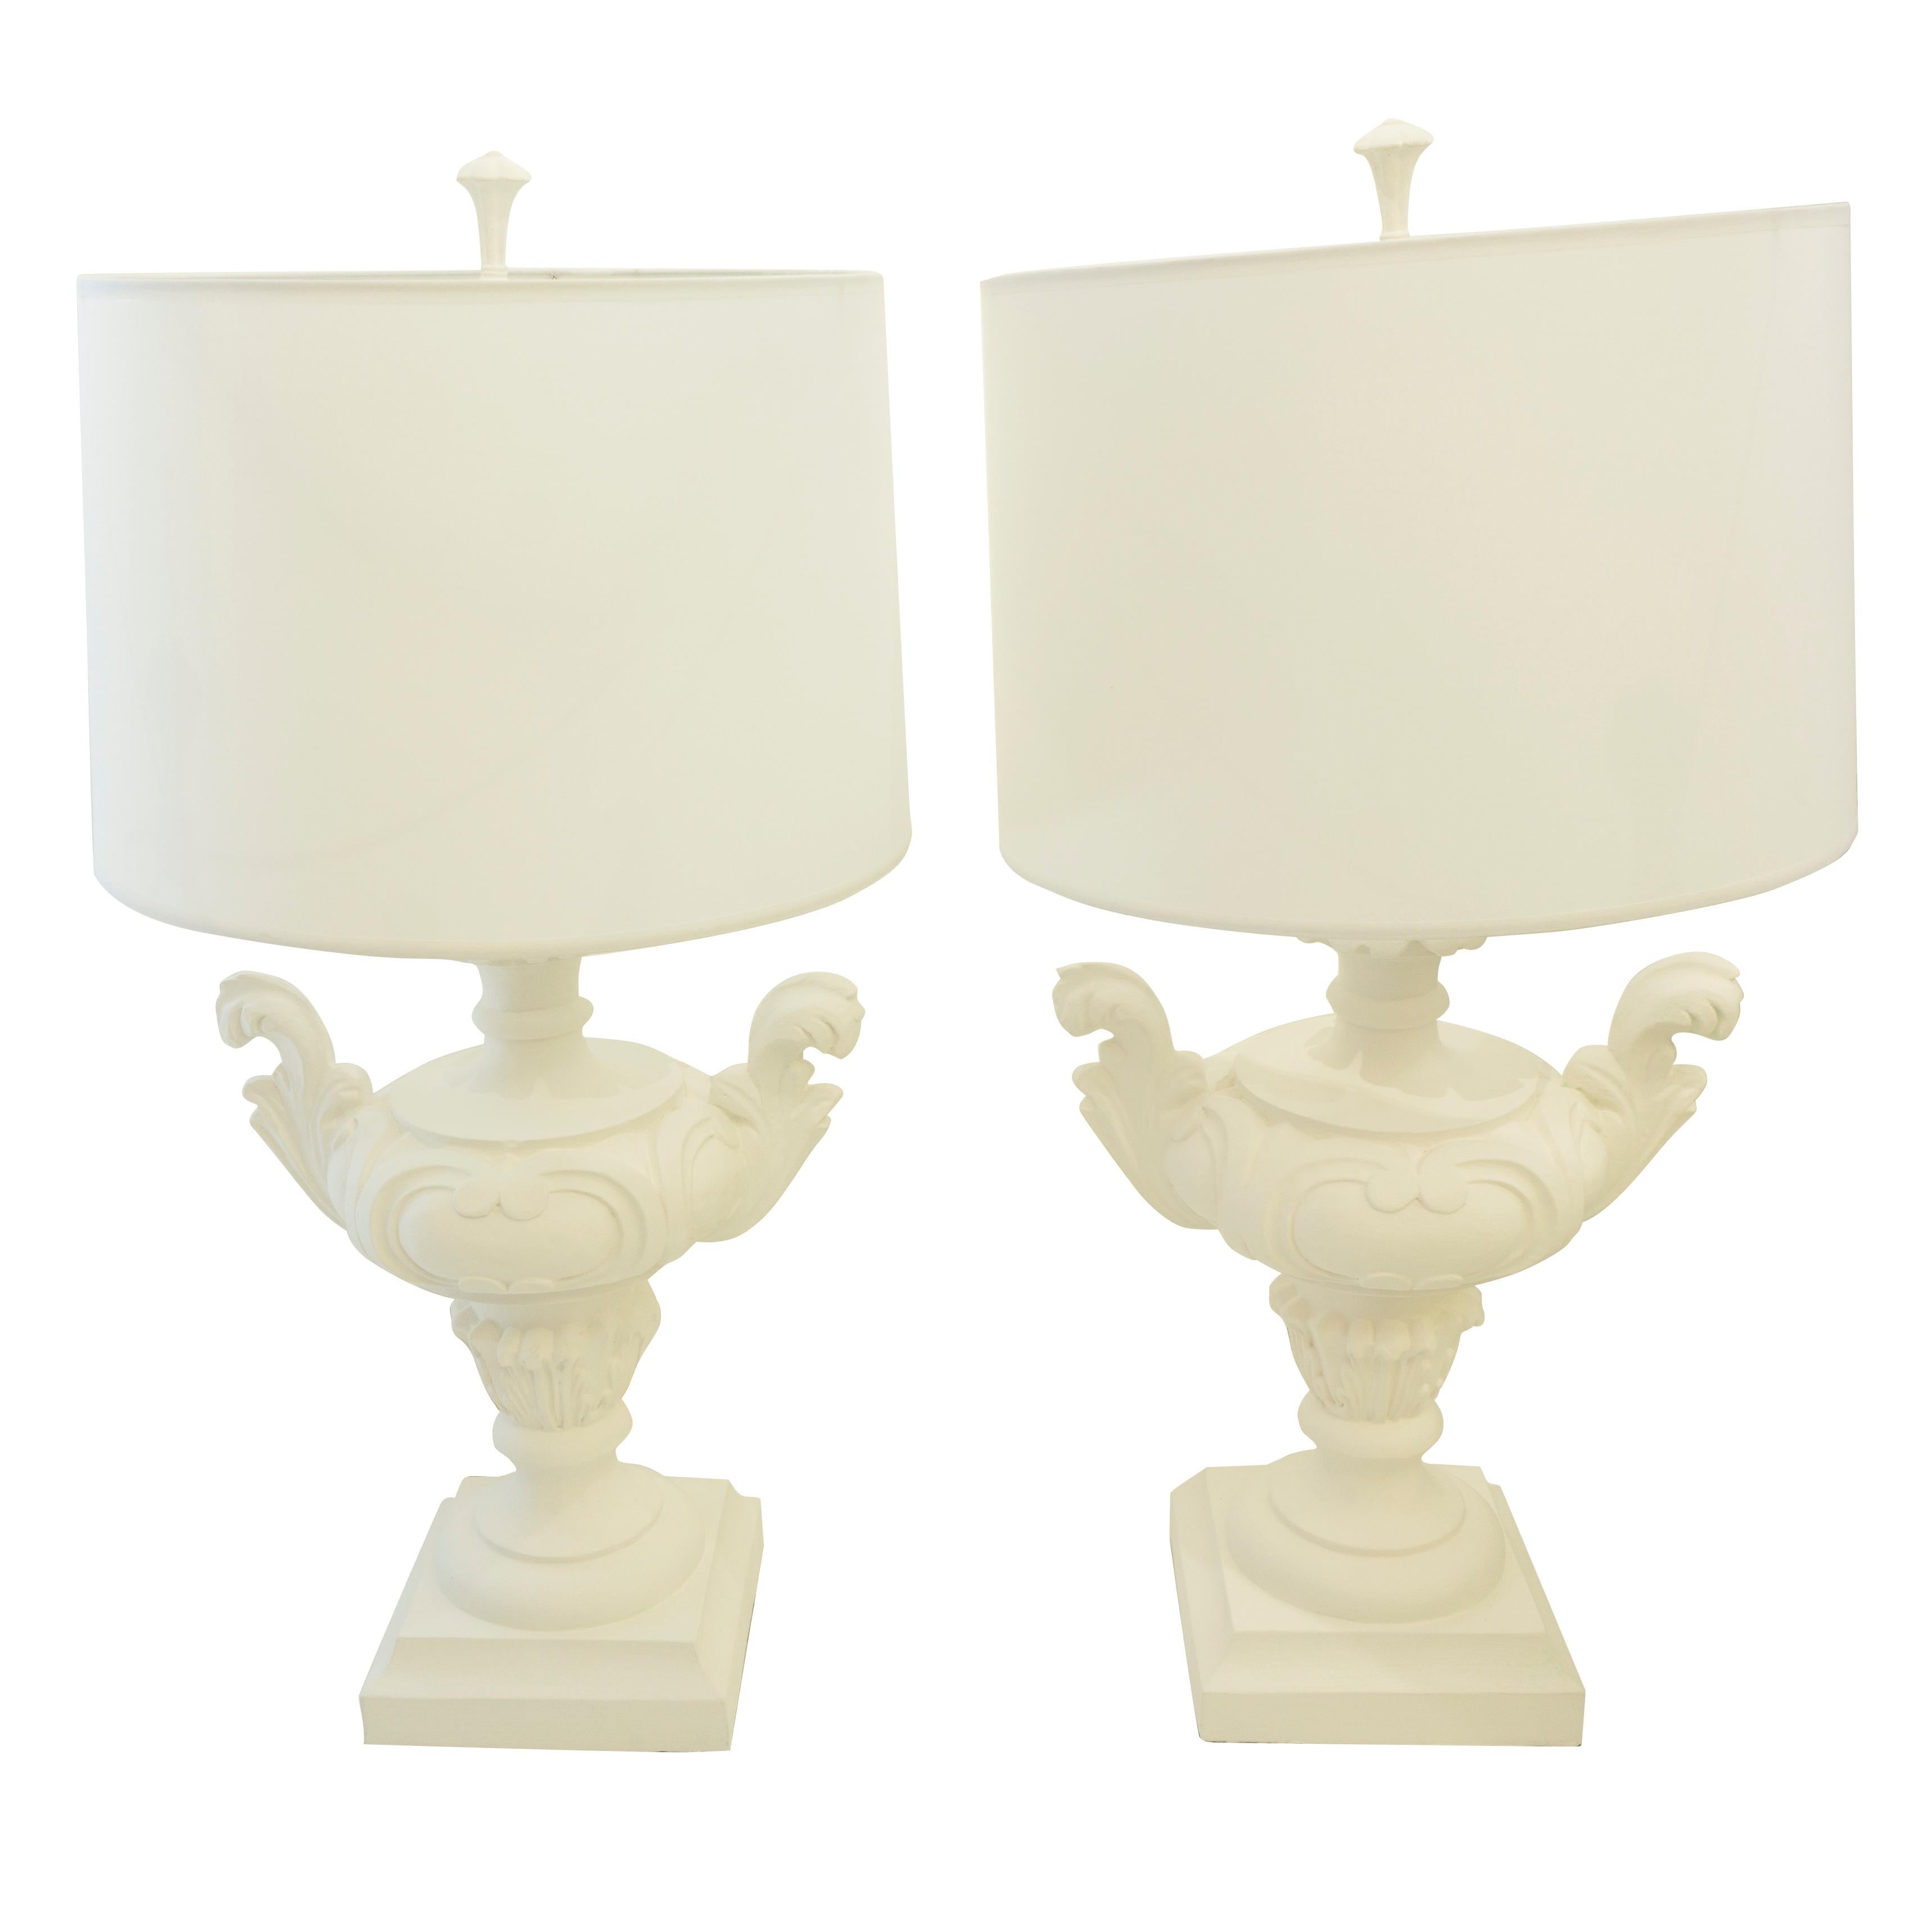 The Rococo table lamps are a pair of vintage table lamps with Corinthian-esque motifs. The decorative body is newly lacquered in matte white unifying the intricate detailing of the design. 

Measurements: 

30” H x 15” W.